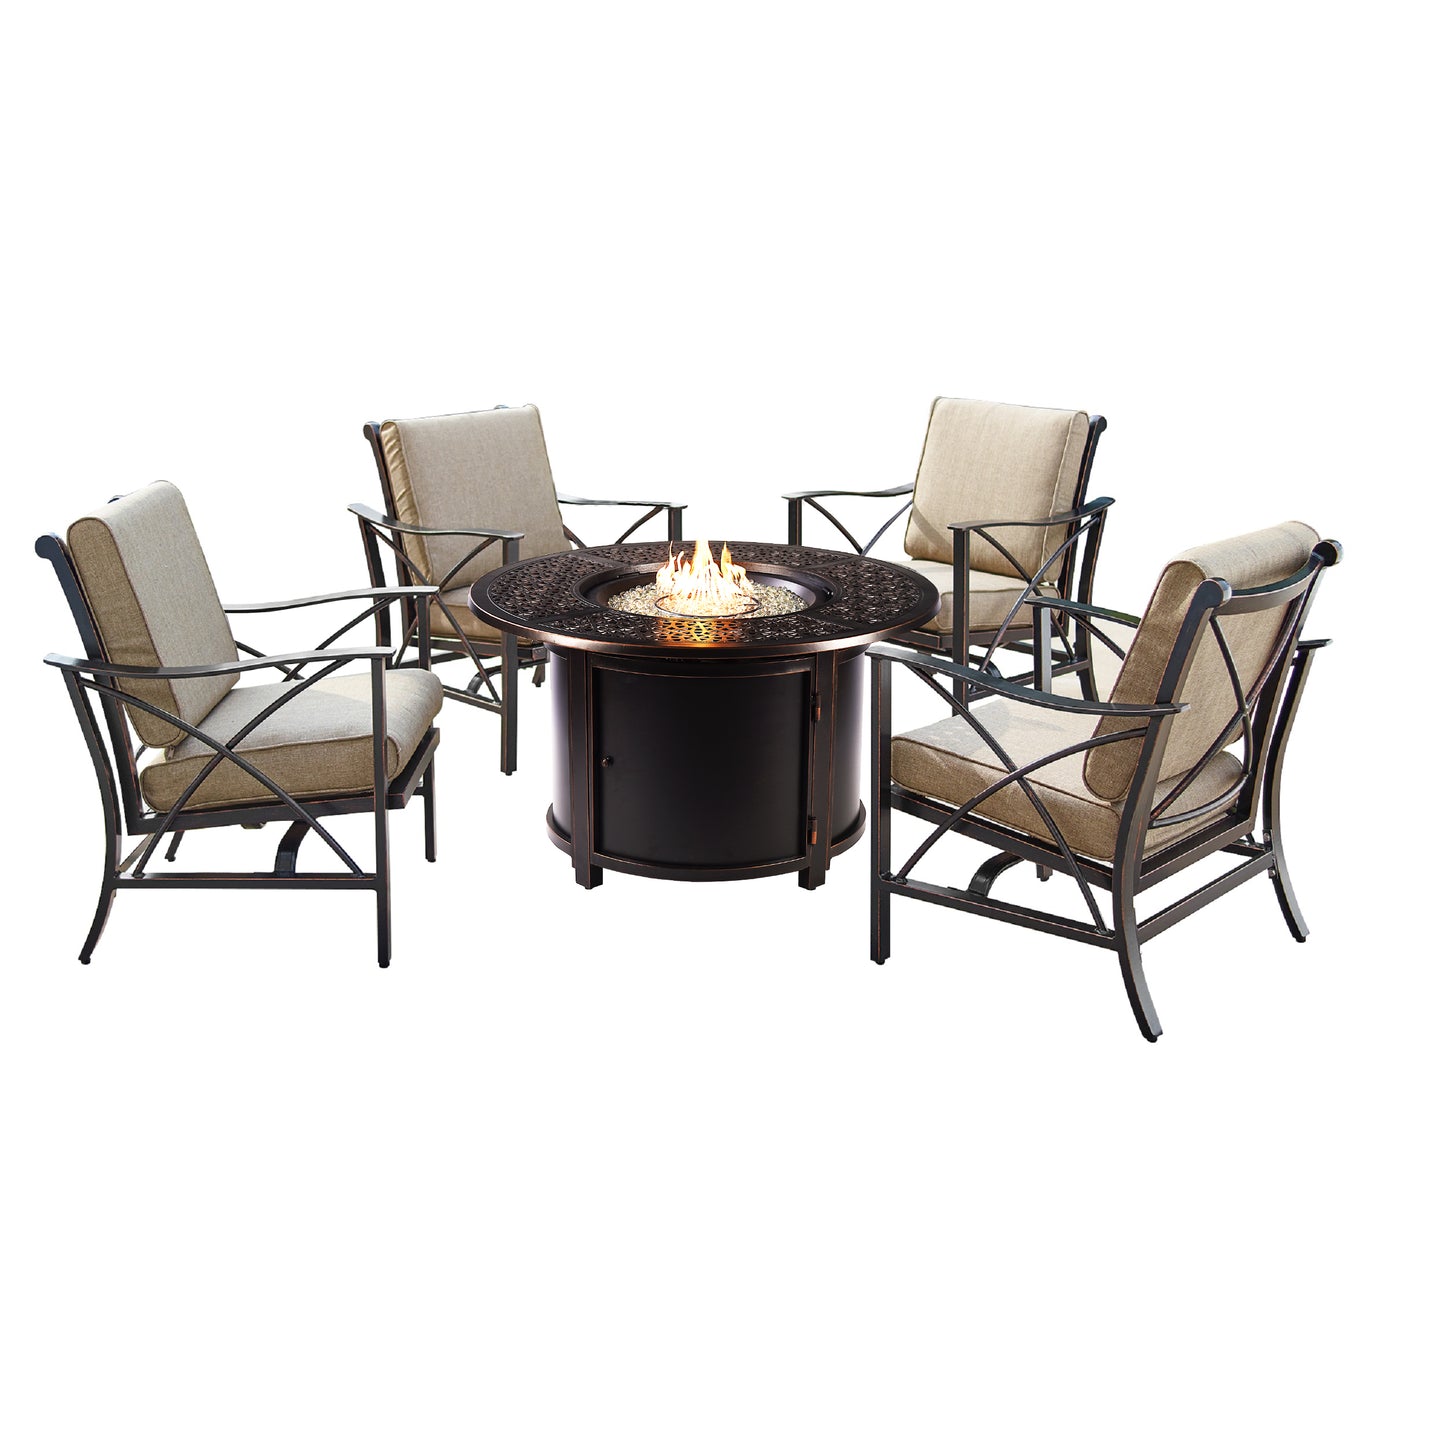 Aluminum 44-in Round Antique Copper Fire Table Set with Rocking Chairs